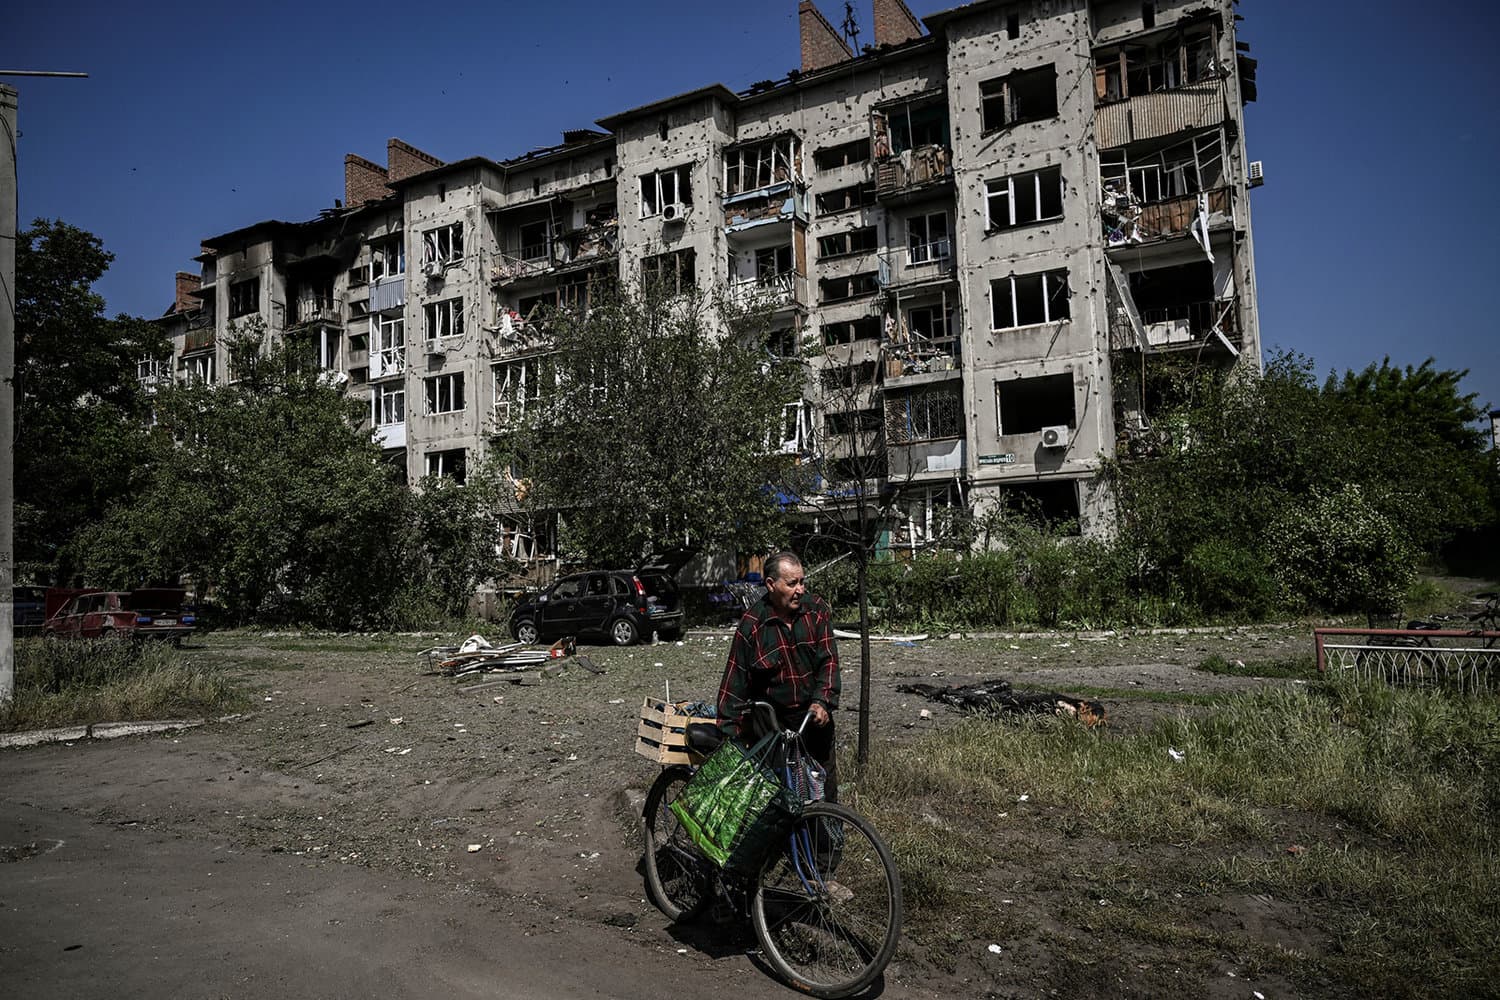 An eldery man walks by a damaged appartment building after a strike in the city of Slovyansk